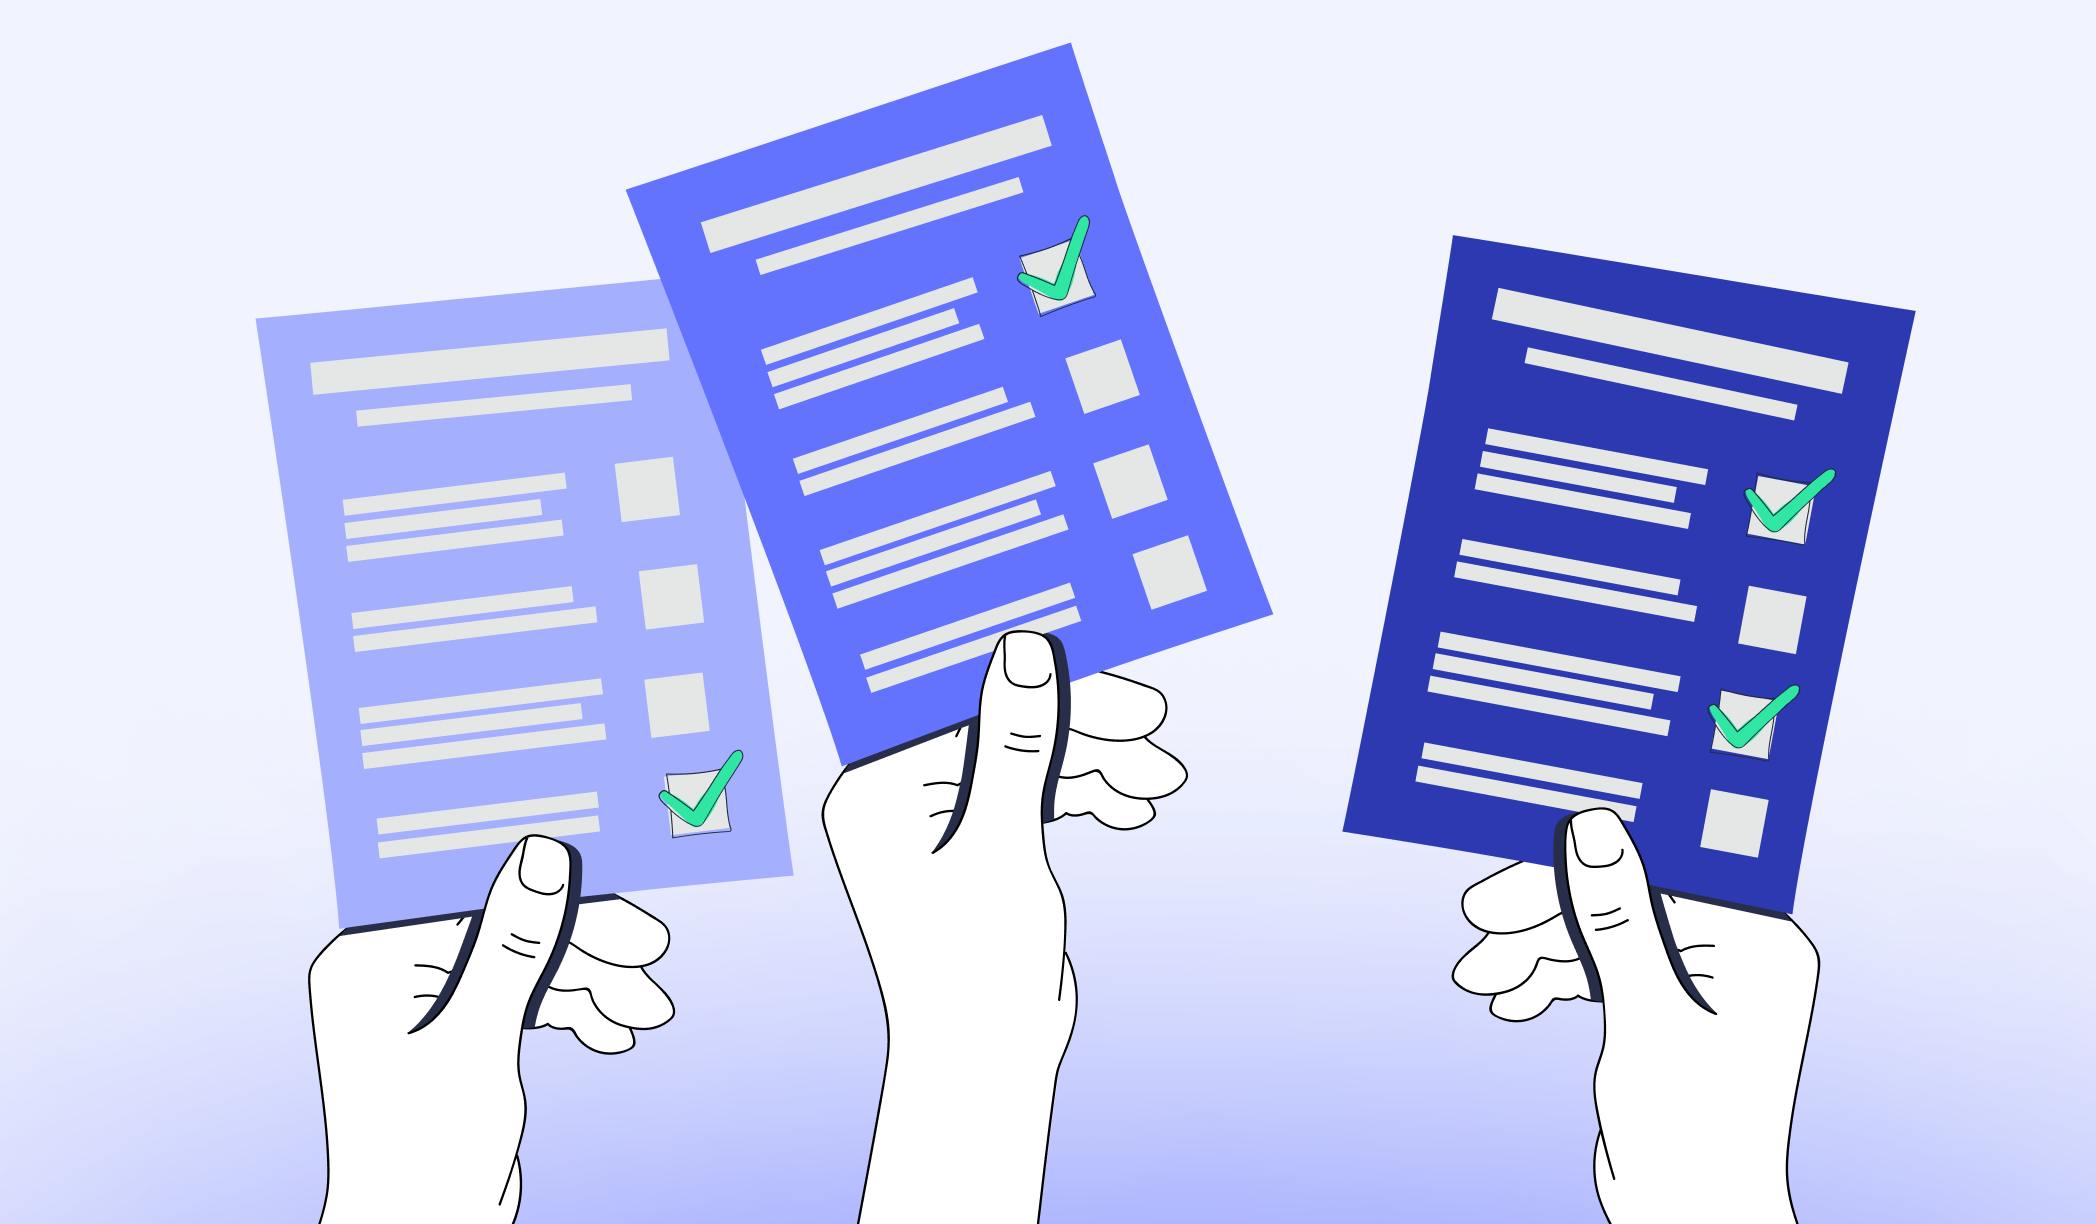 Illustration of 3 hands holding a survey with checkmarks